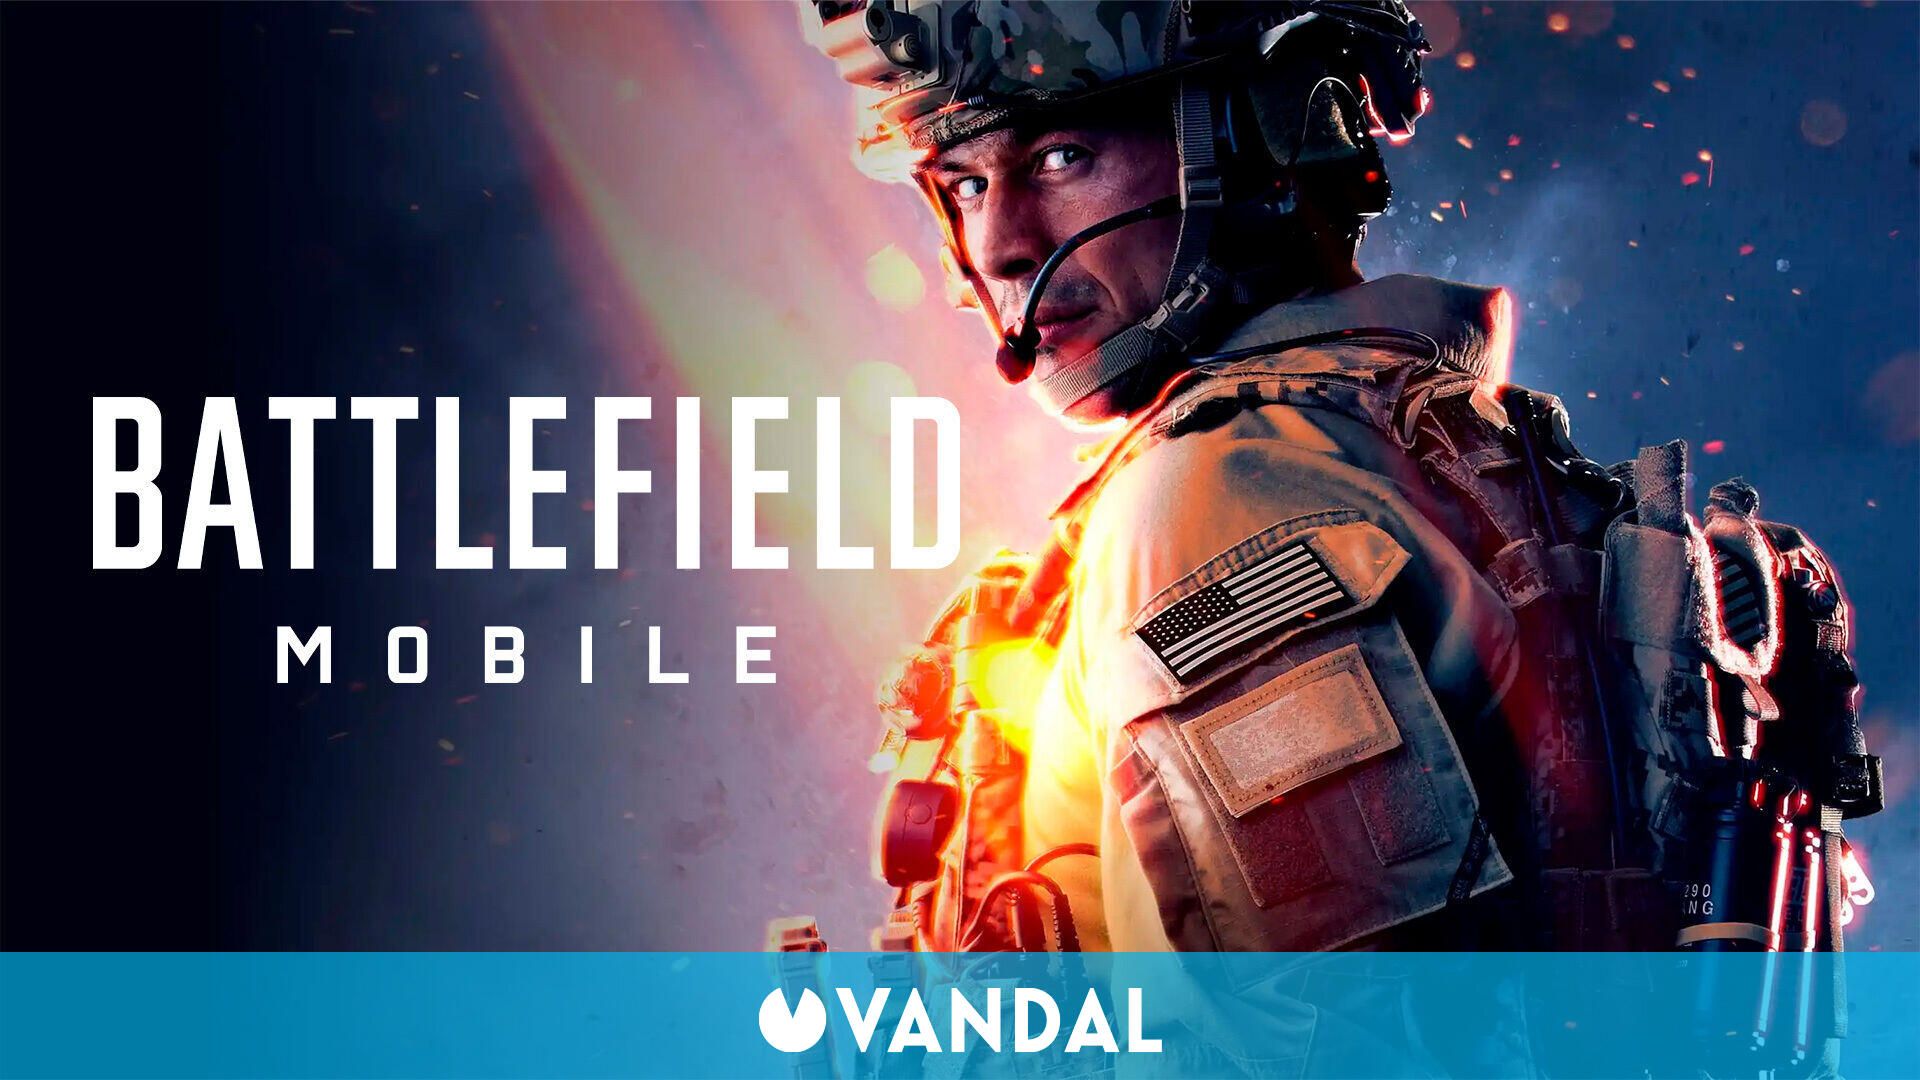 Battlefield 2042’s poor reception led to Battlefield Mobile’s cancellation